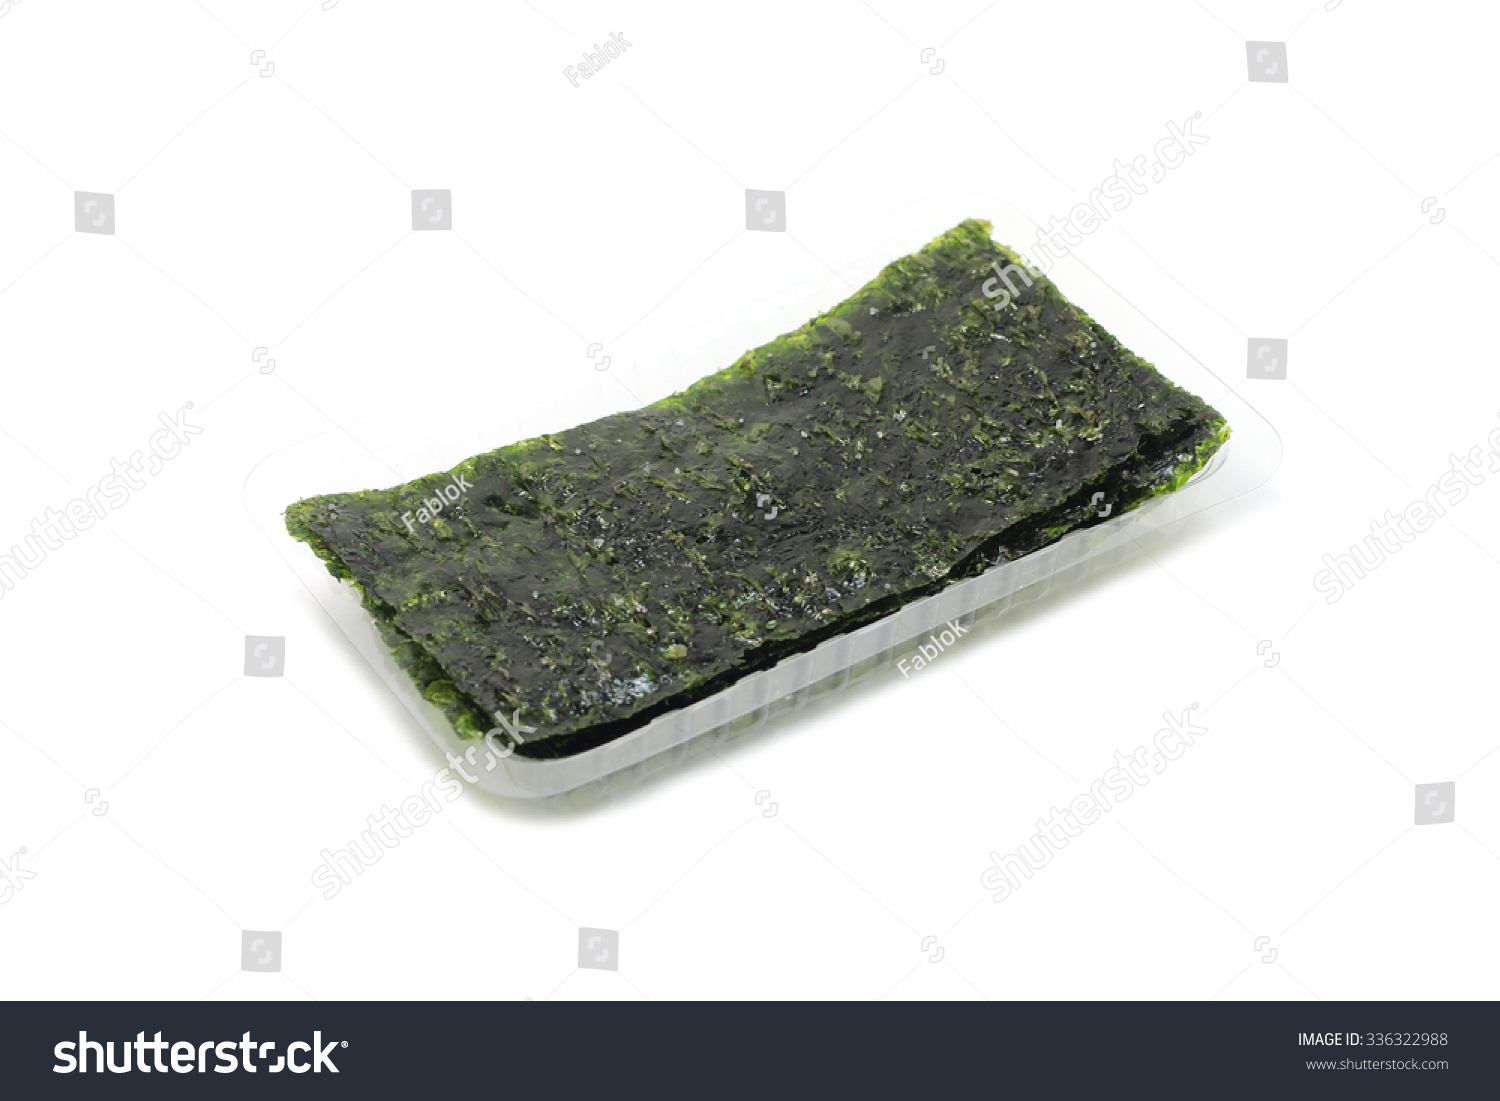 Download Plate Dried Seaweed Plastic Container On Food And Drink Stock Image 336322988 PSD Mockup Templates